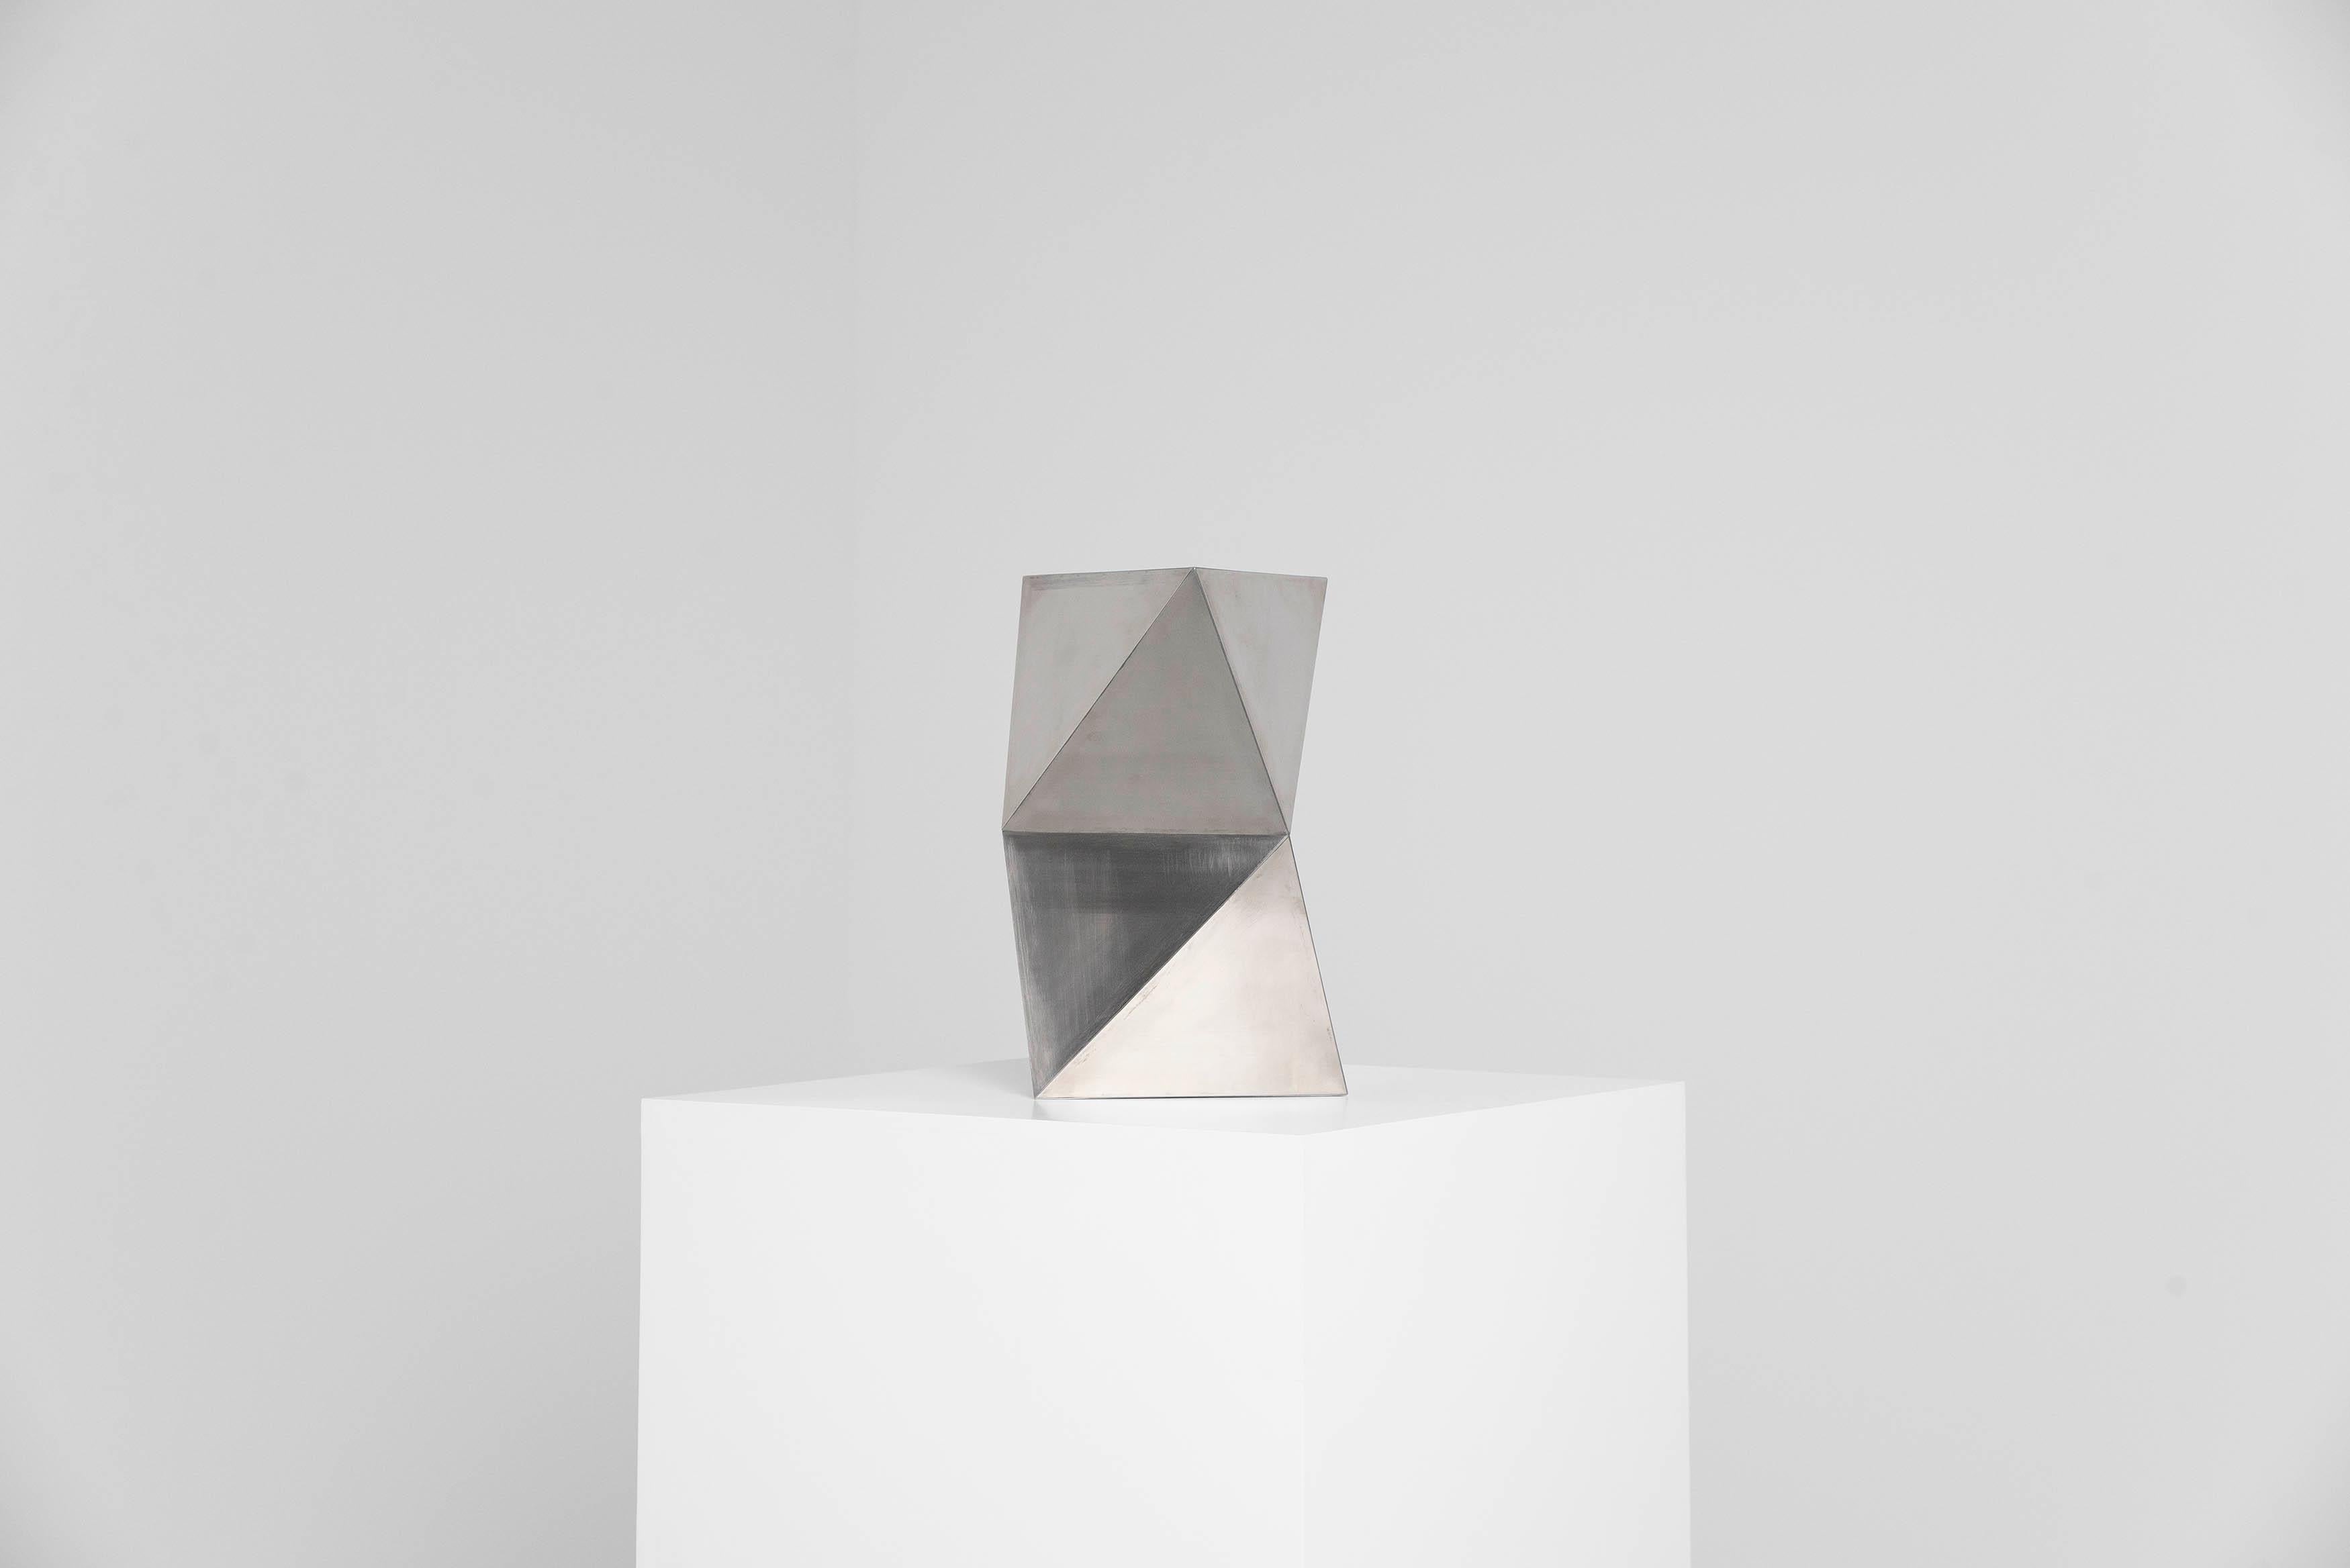 Rudolf Wolf Geometric Stainless Steel Sculpture 1981 For Sale 2